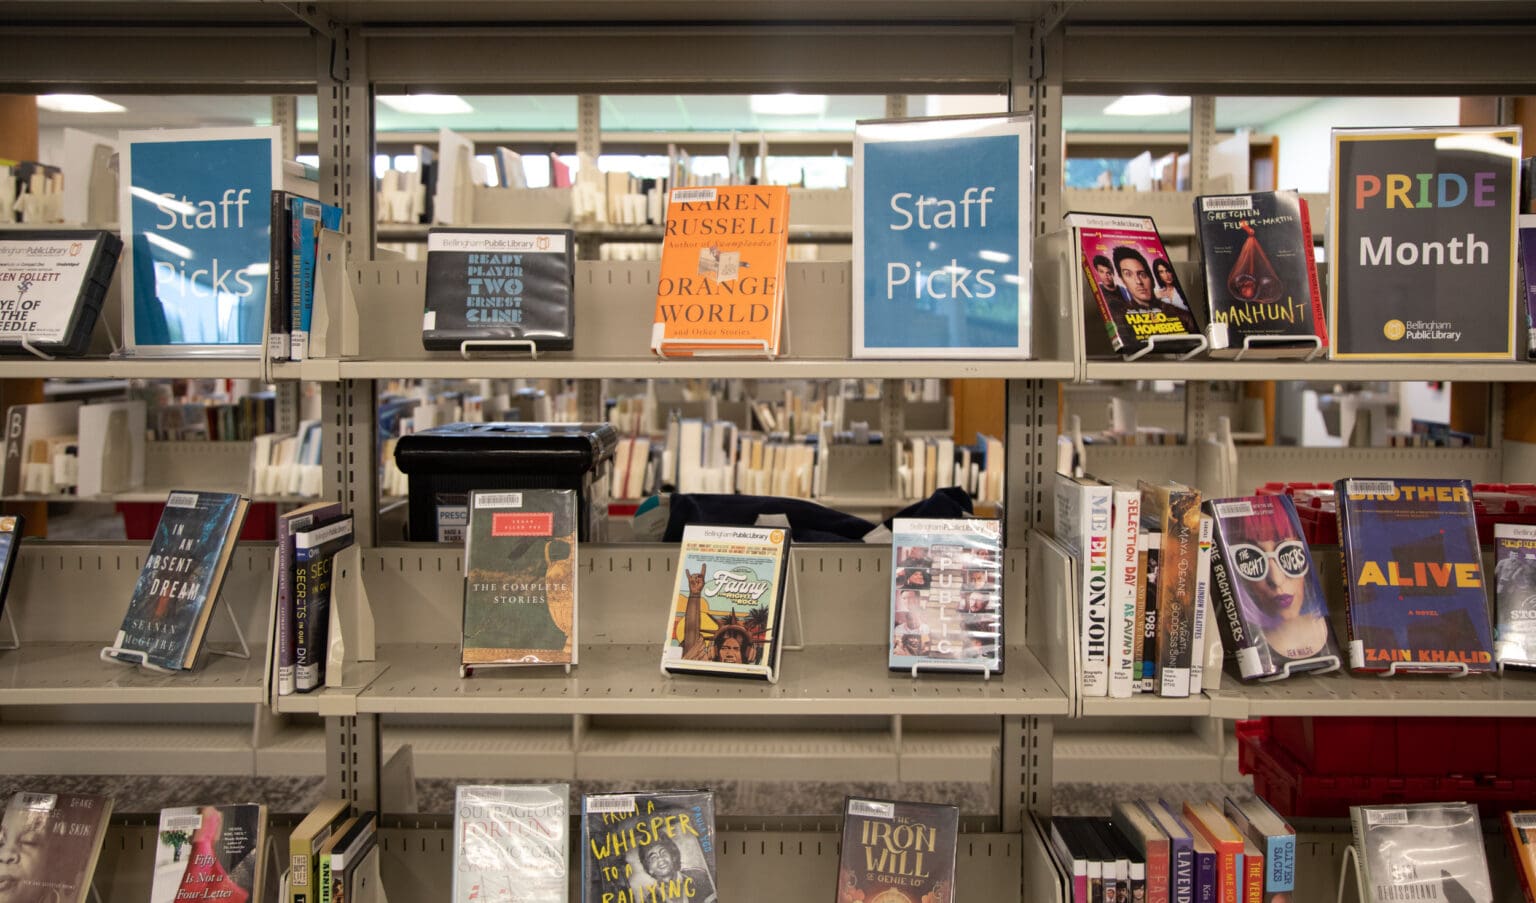 Staff Picks are shown displayed side by side on shelves at the Bellingham Public Library.